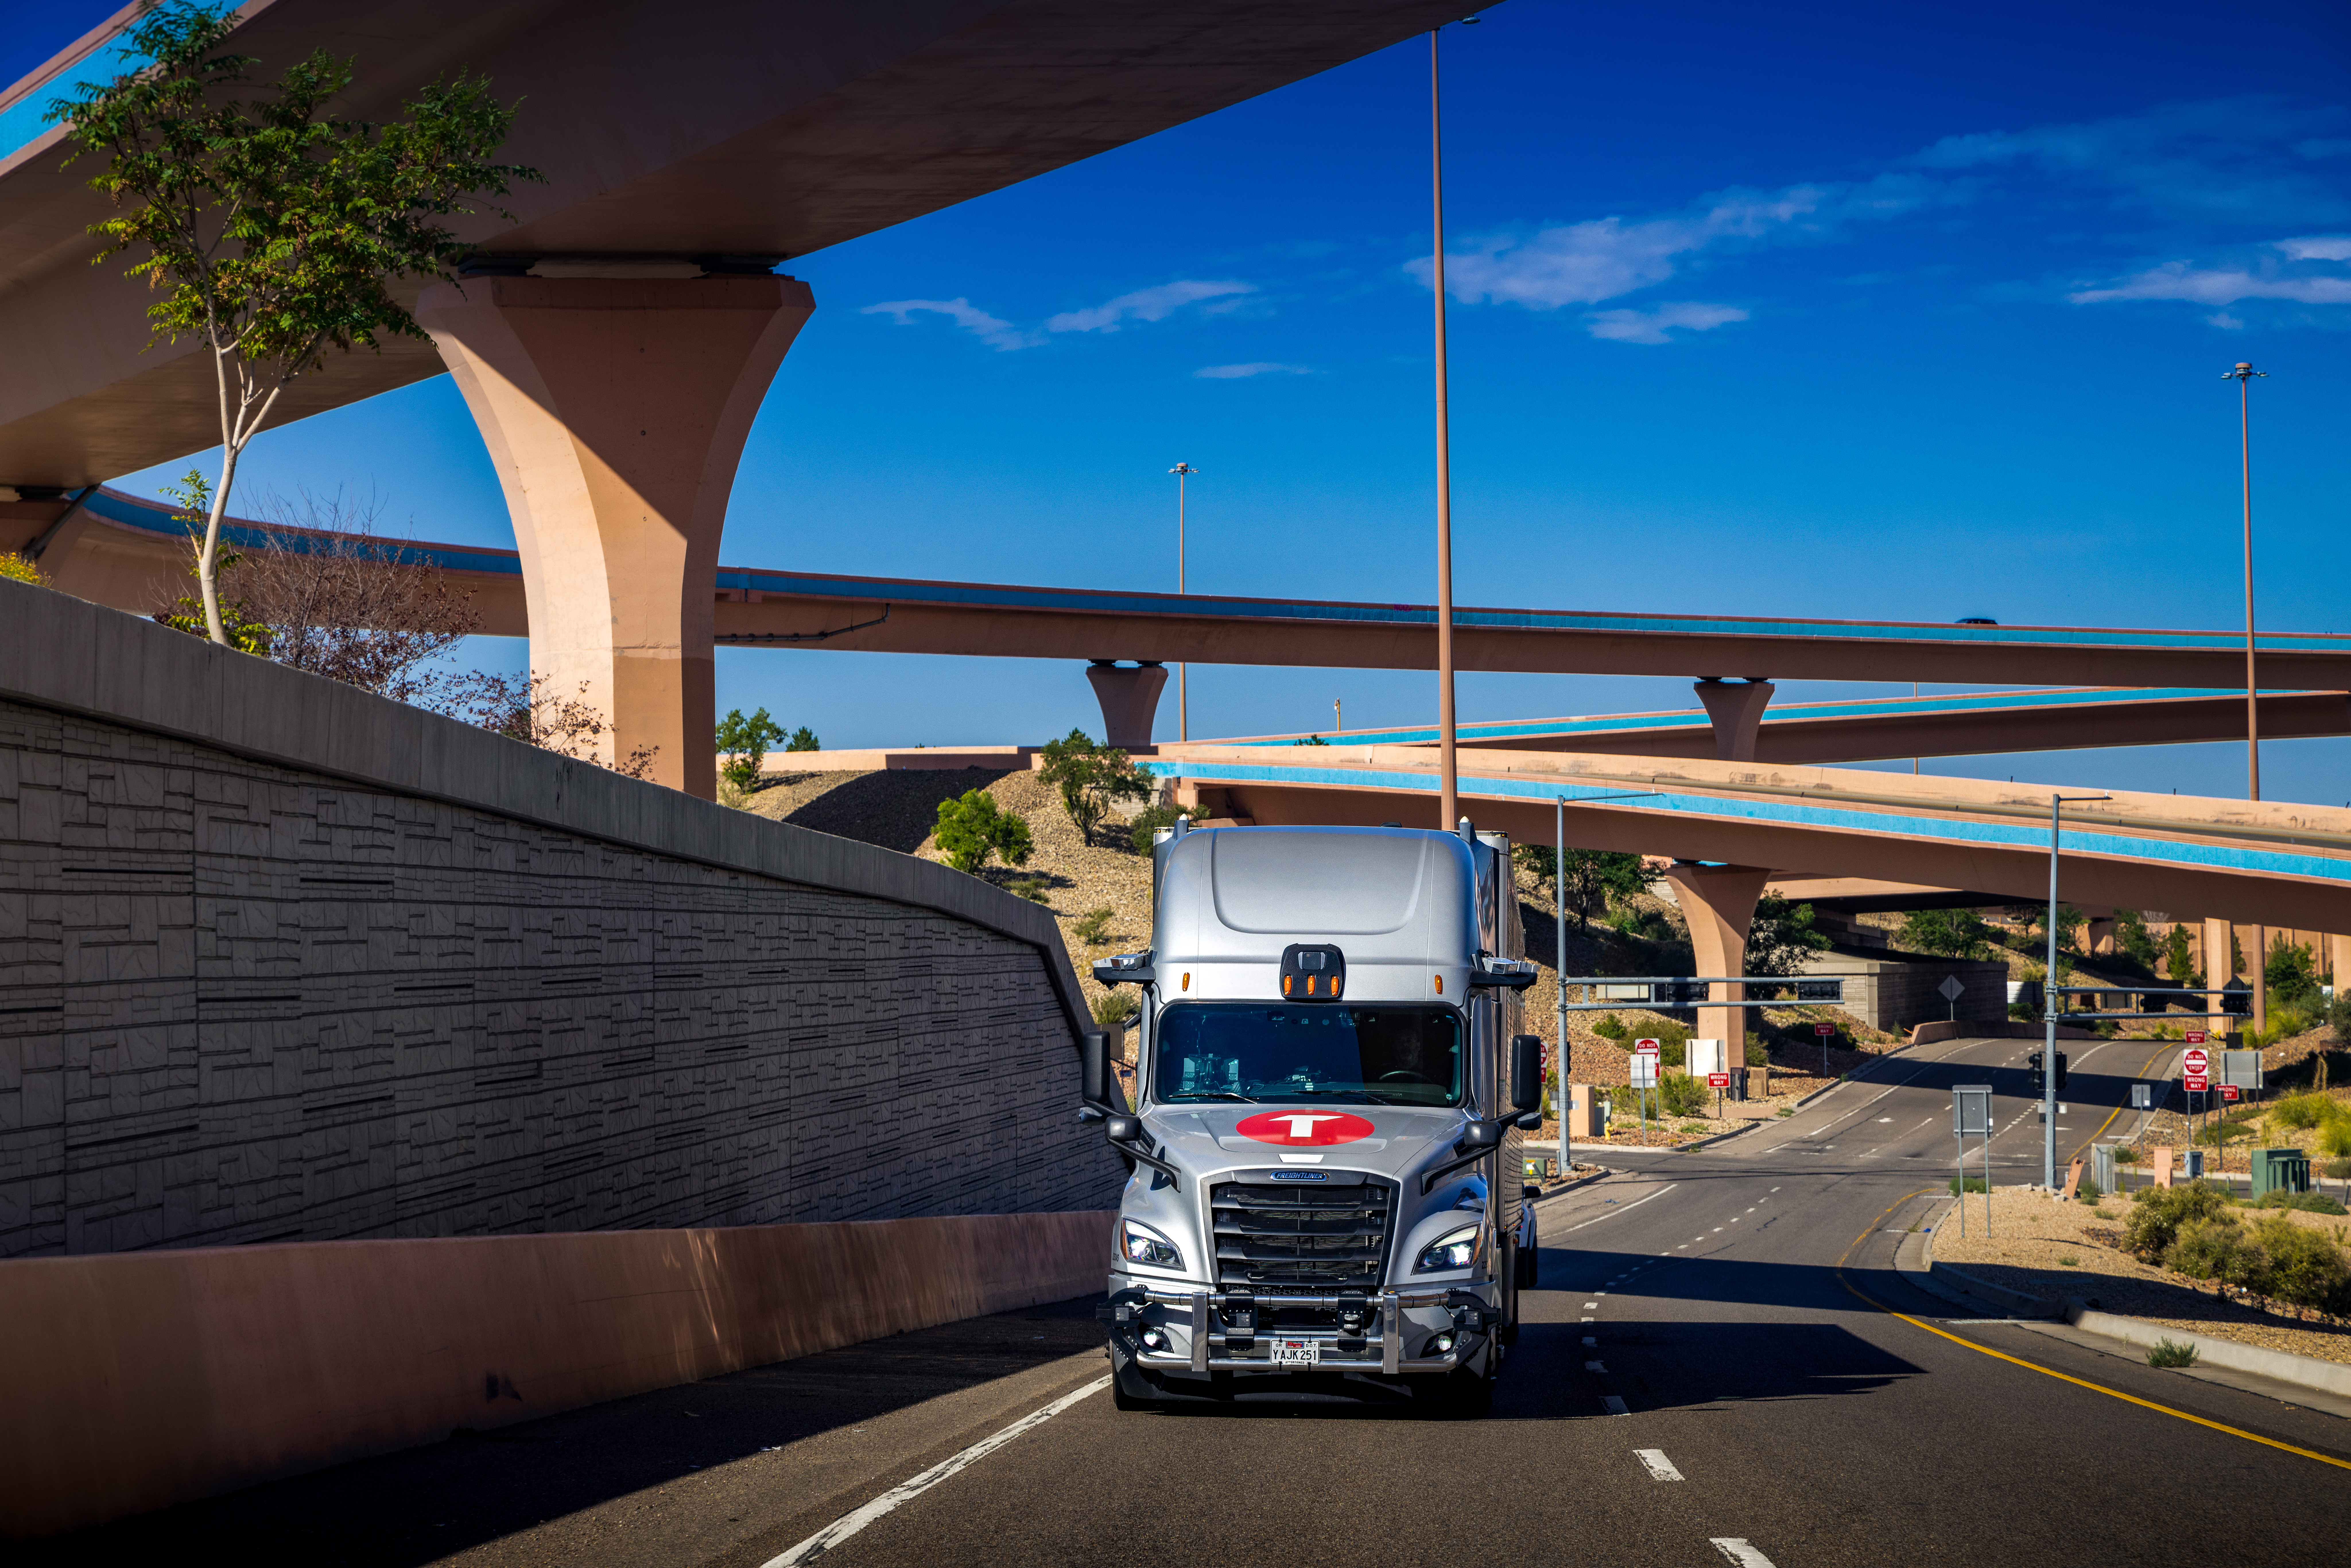 Torc autonomous truck on the highway with overpasses in New Mexico